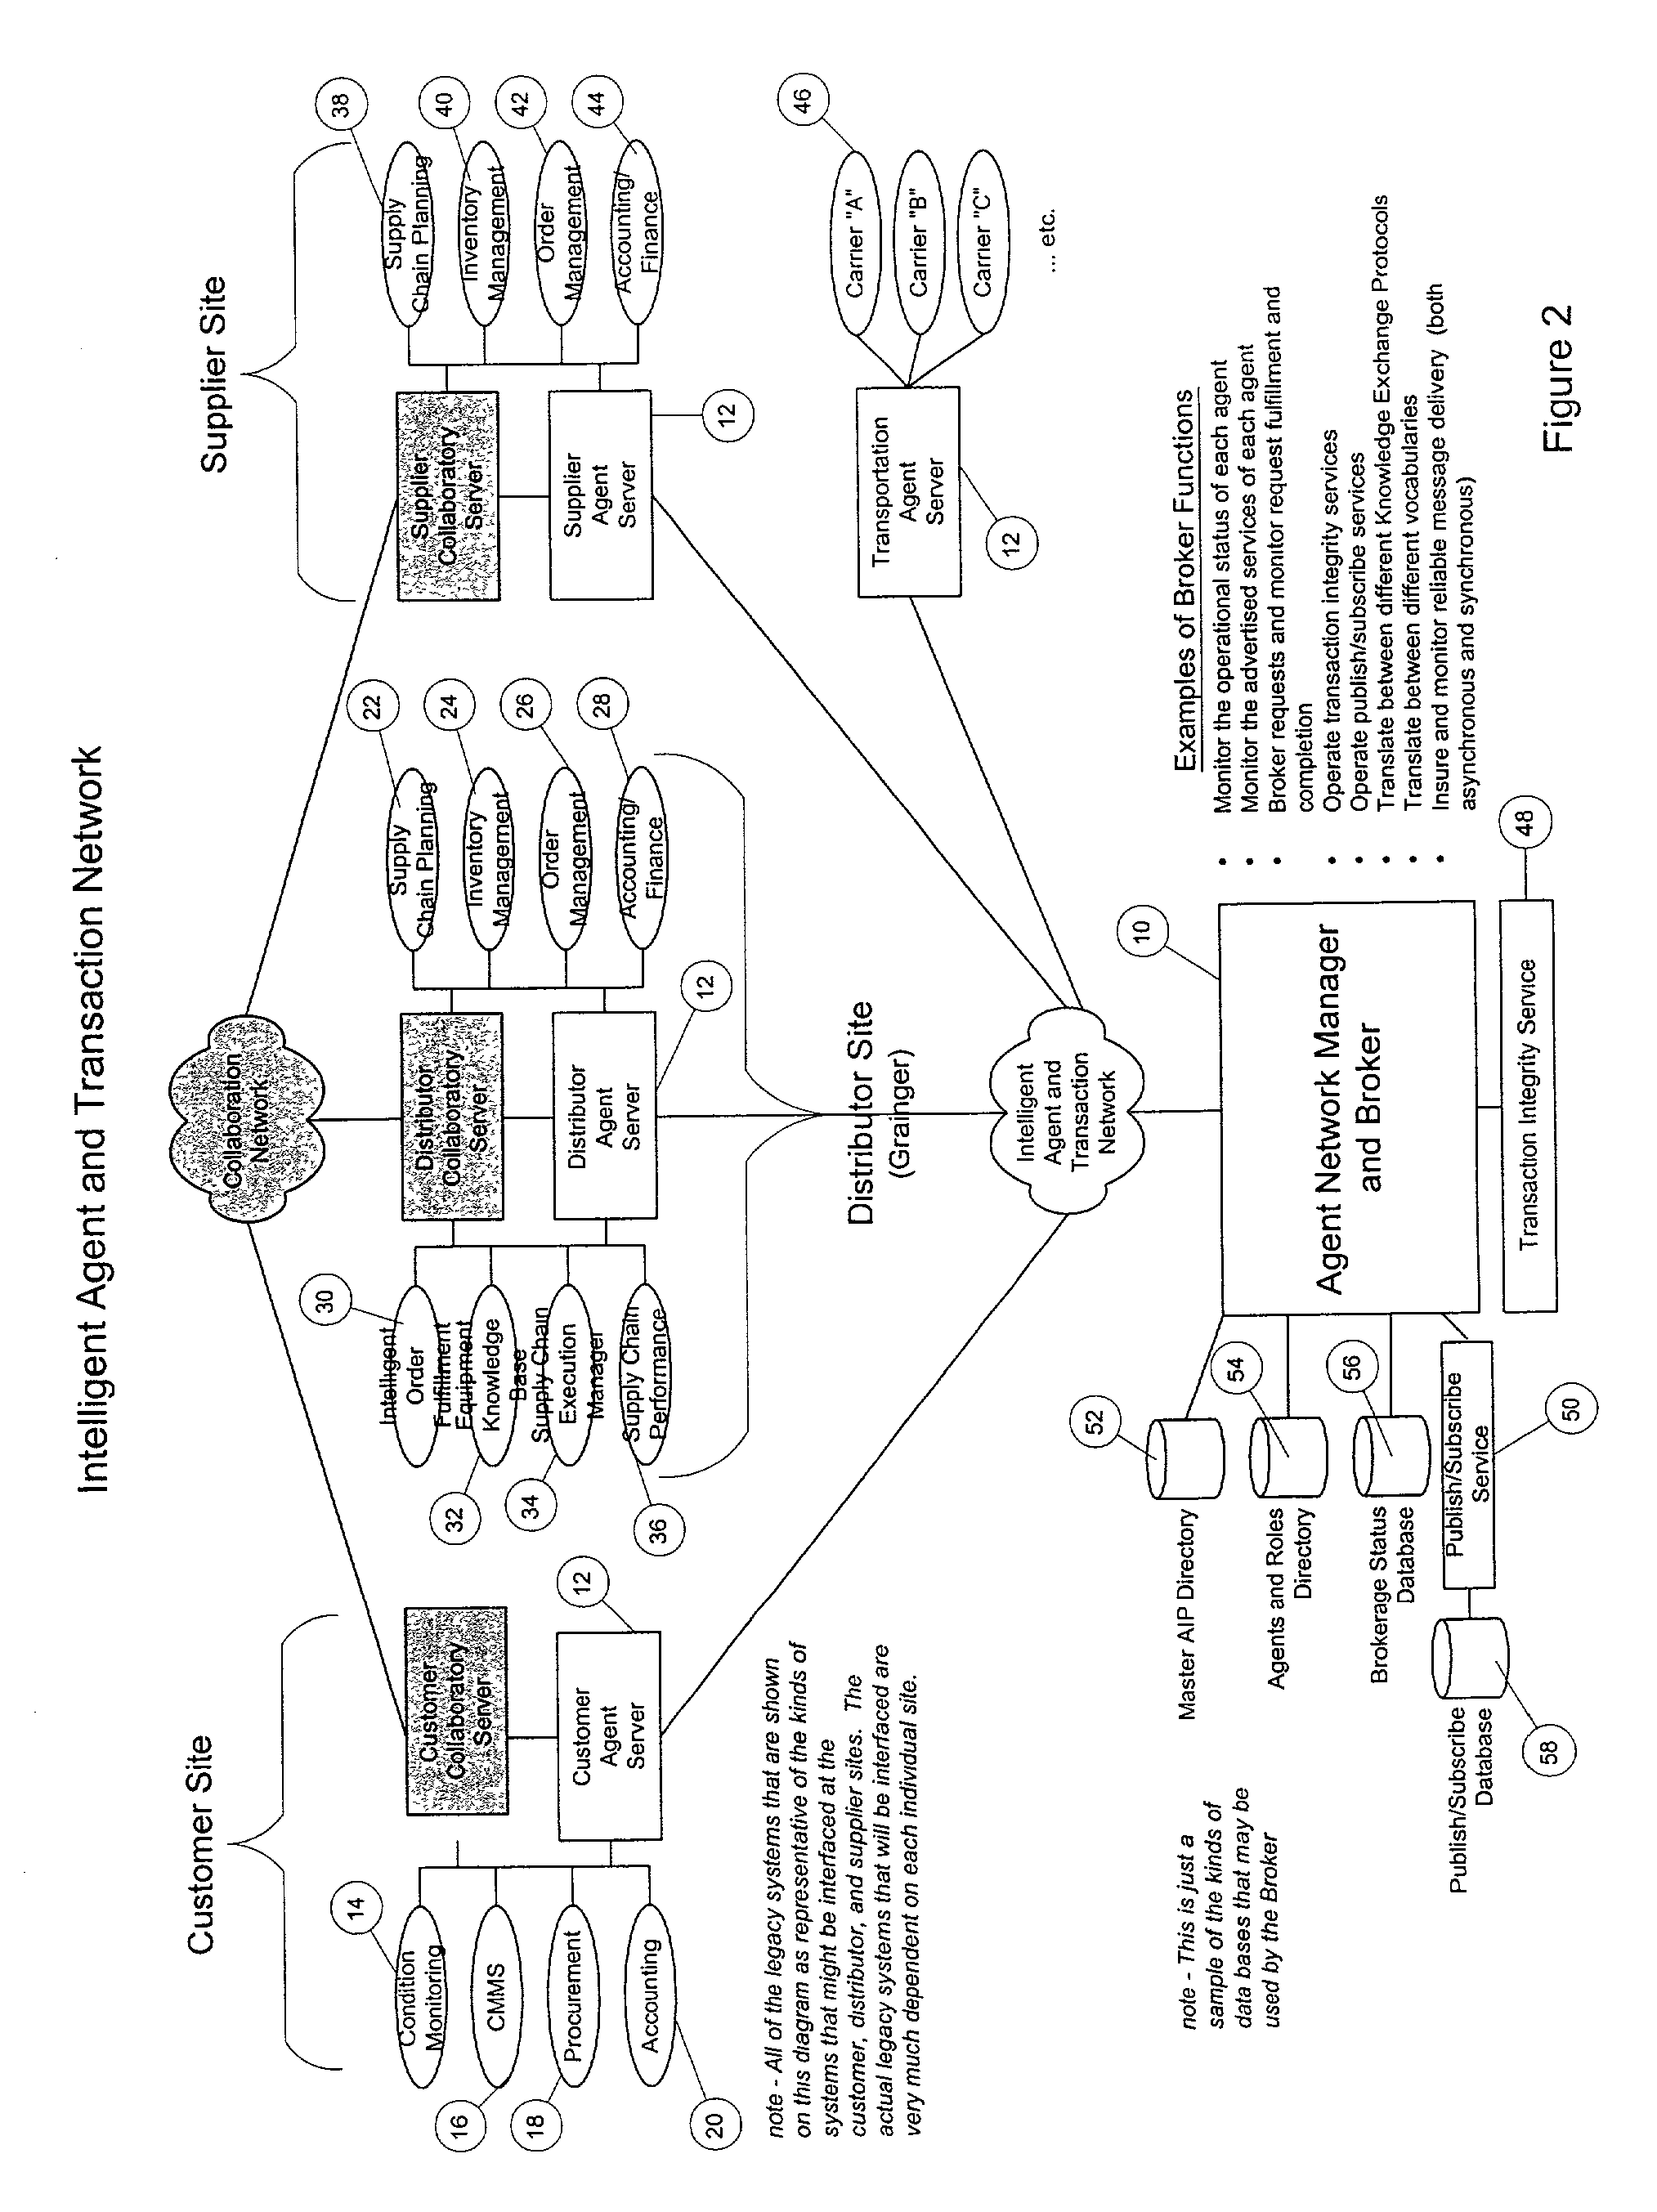 Method for fulfilling an order in an integrated supply chain management system